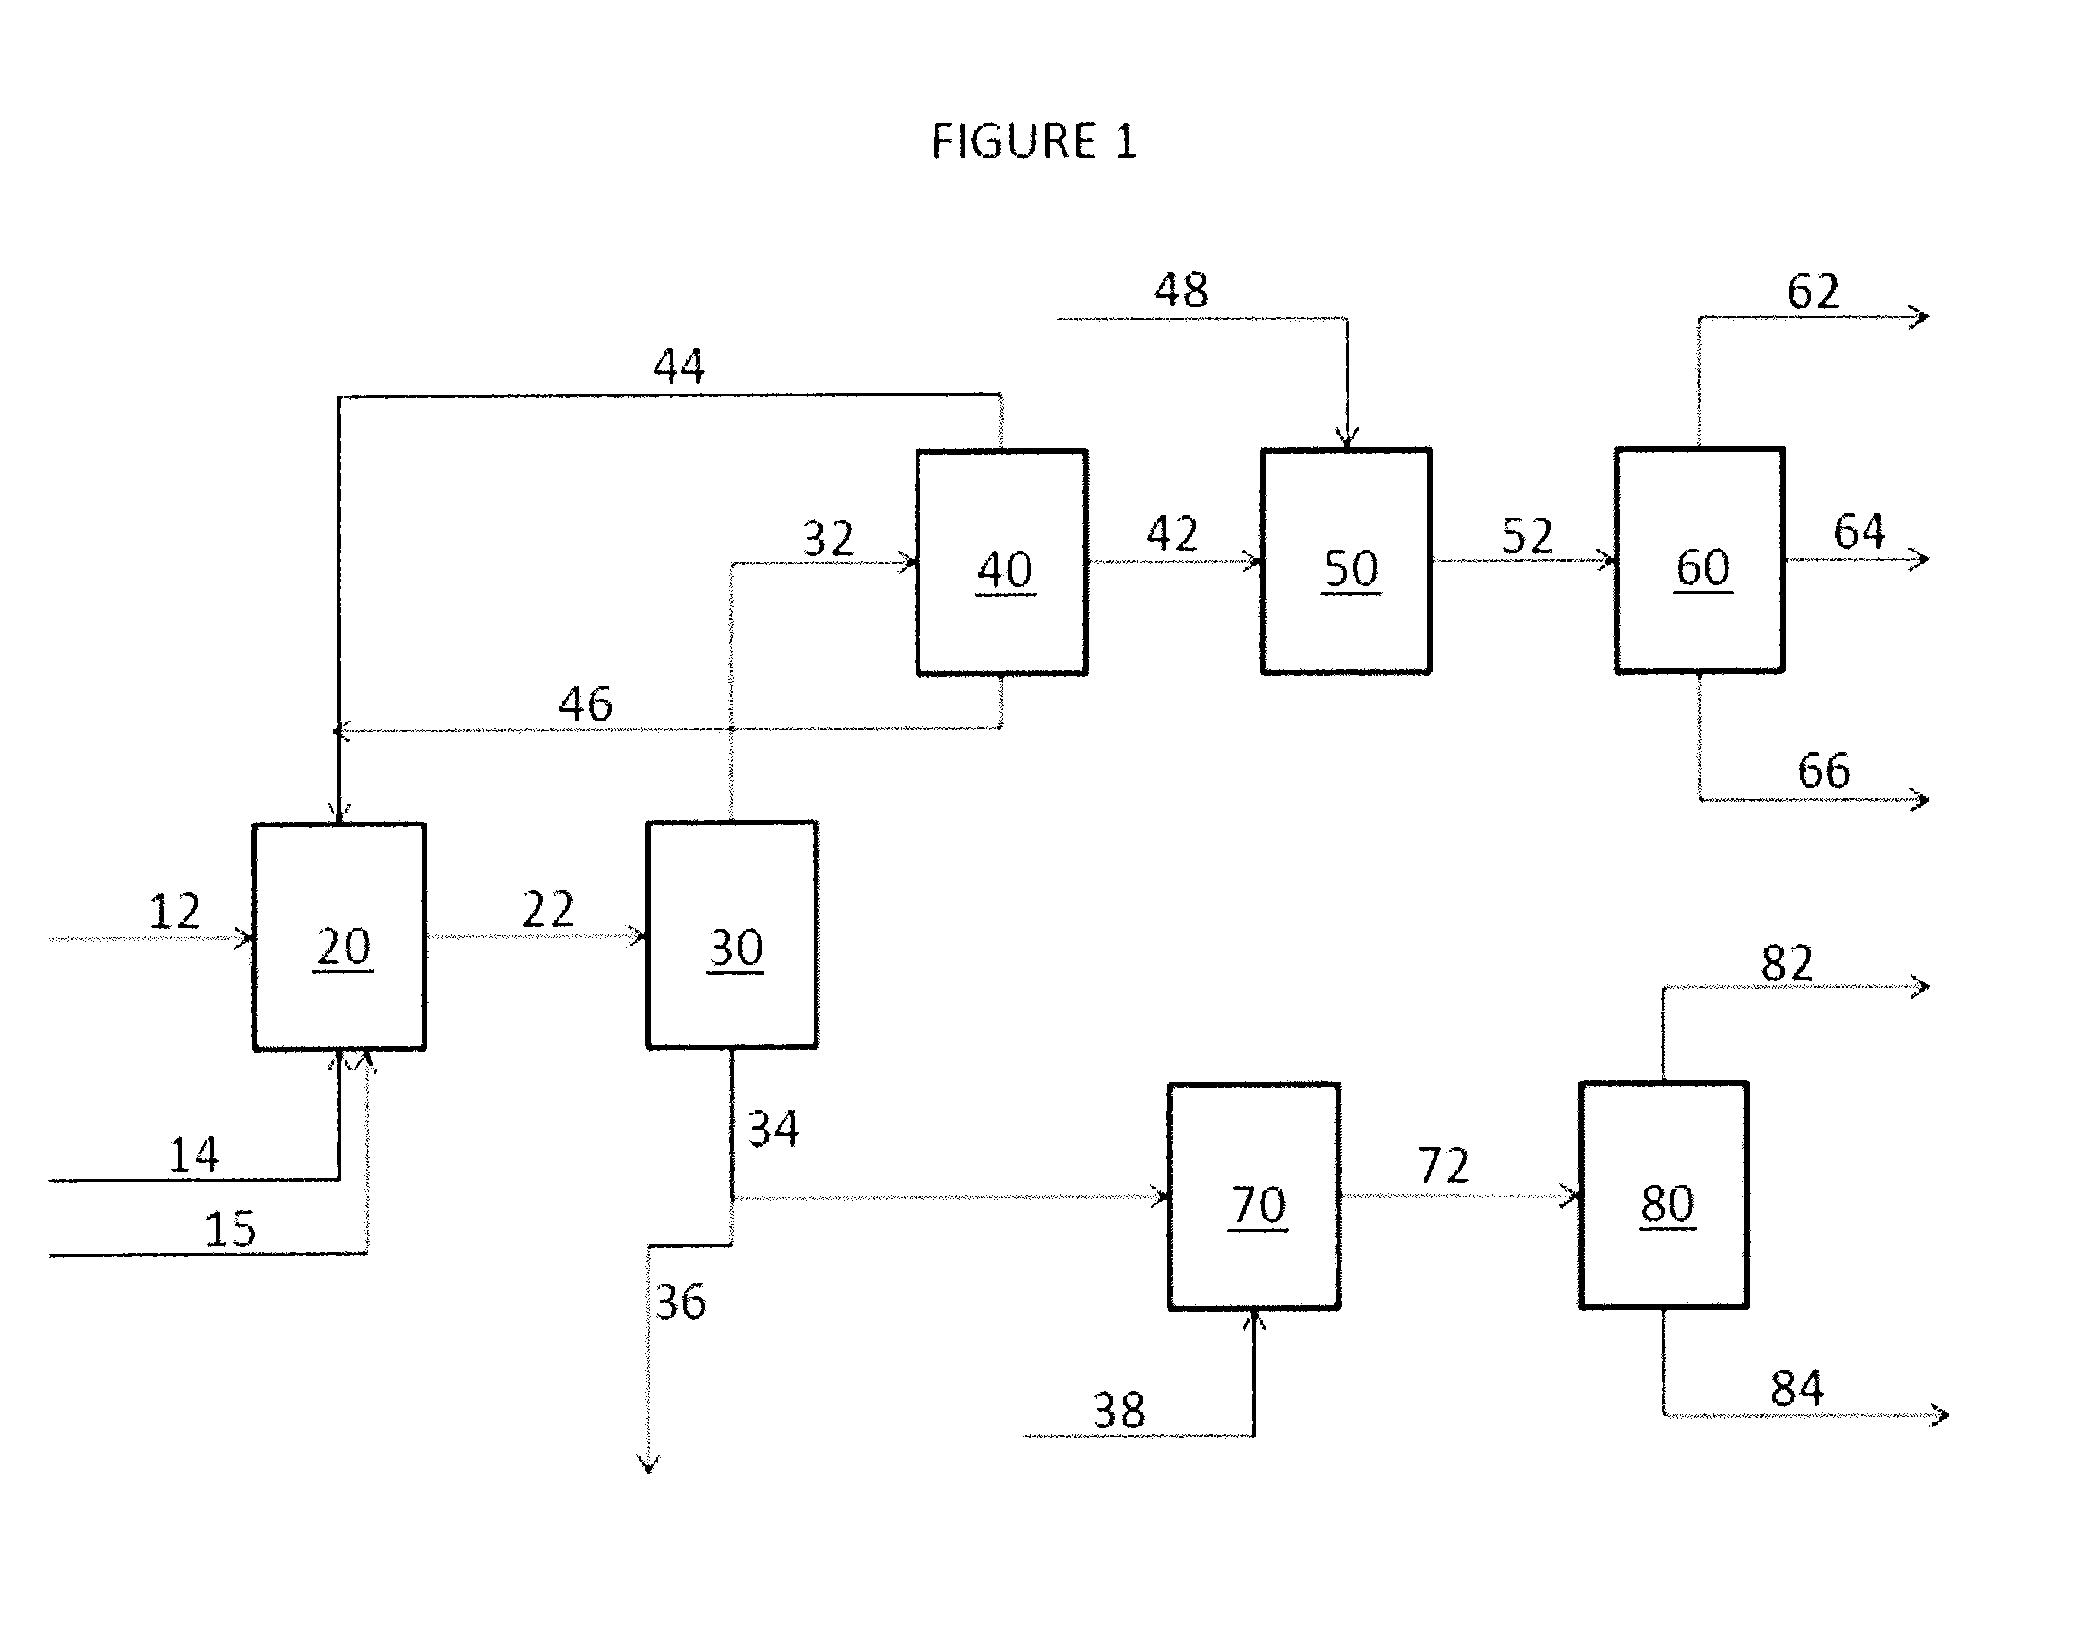 Methods of refining and producing dibasic esters and acids from natural oil feedstocks